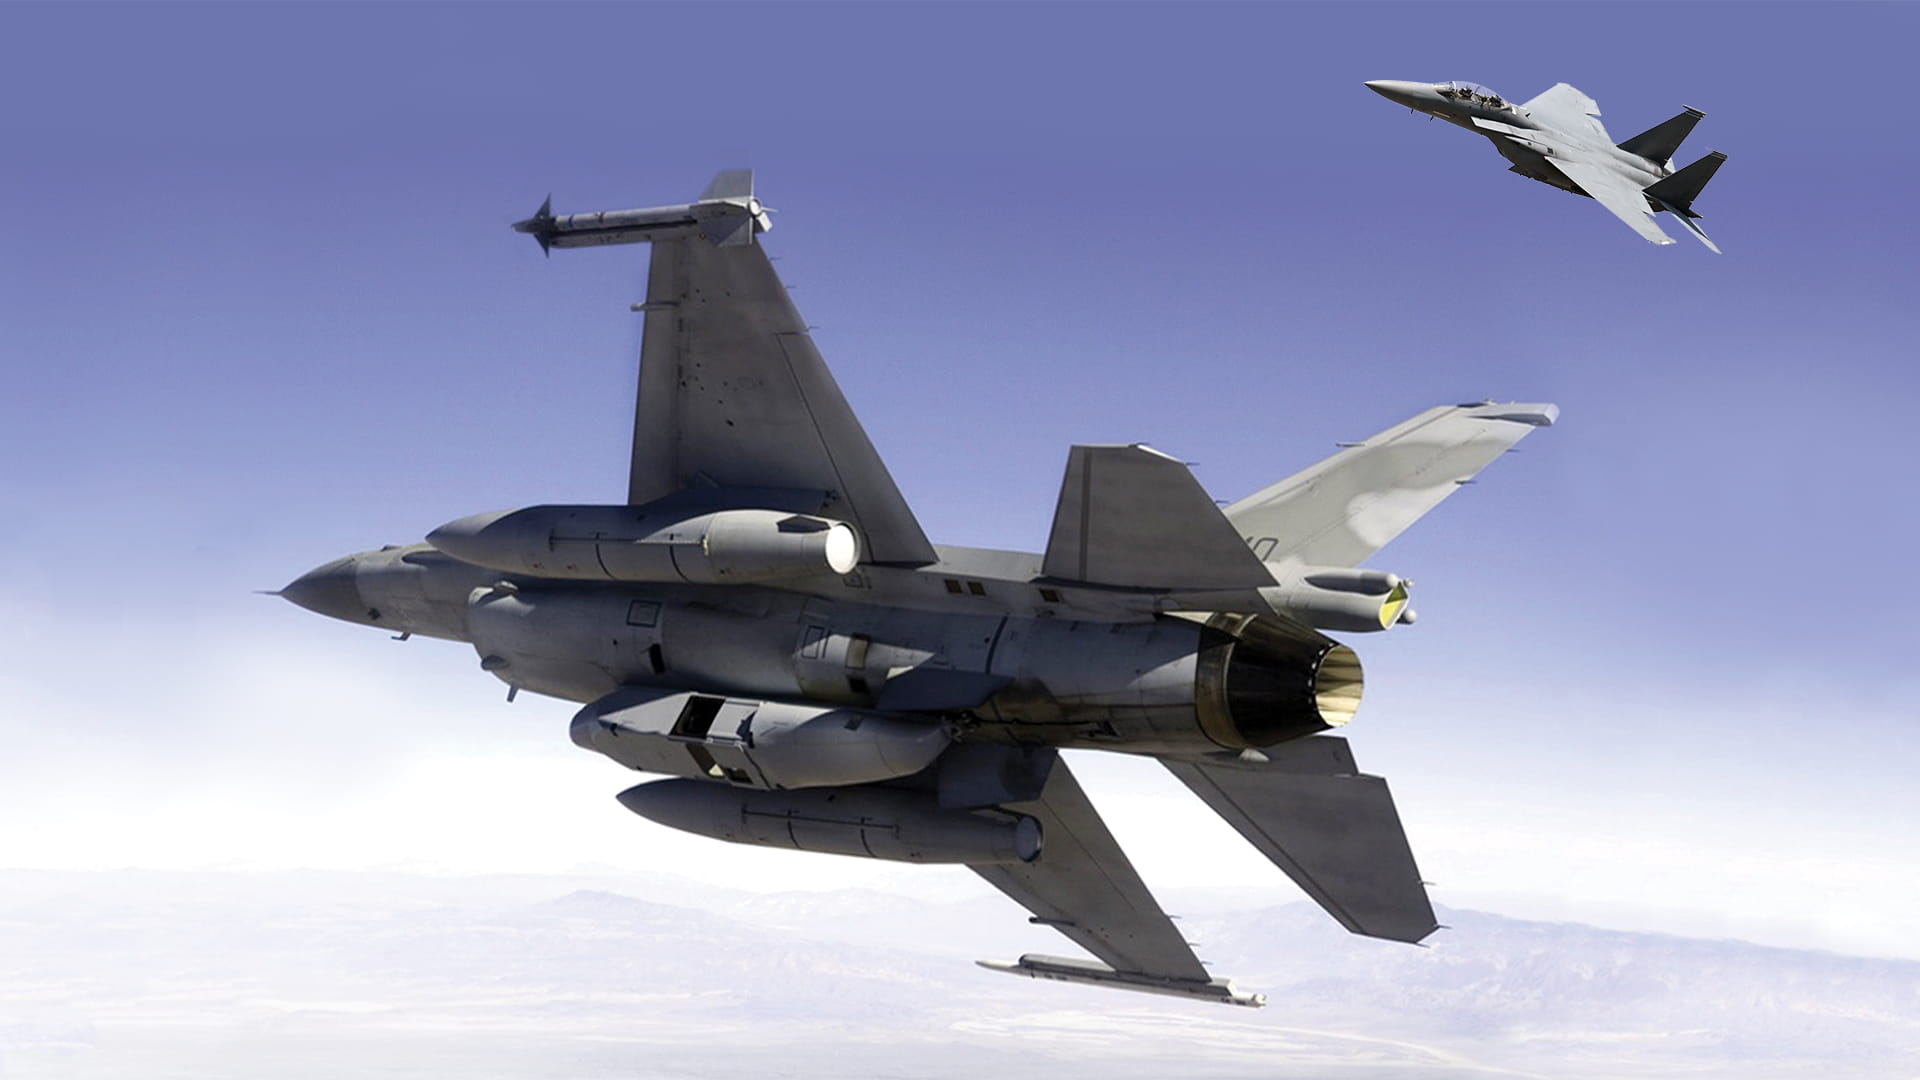 F-15 and F-16 fighter jets soaring